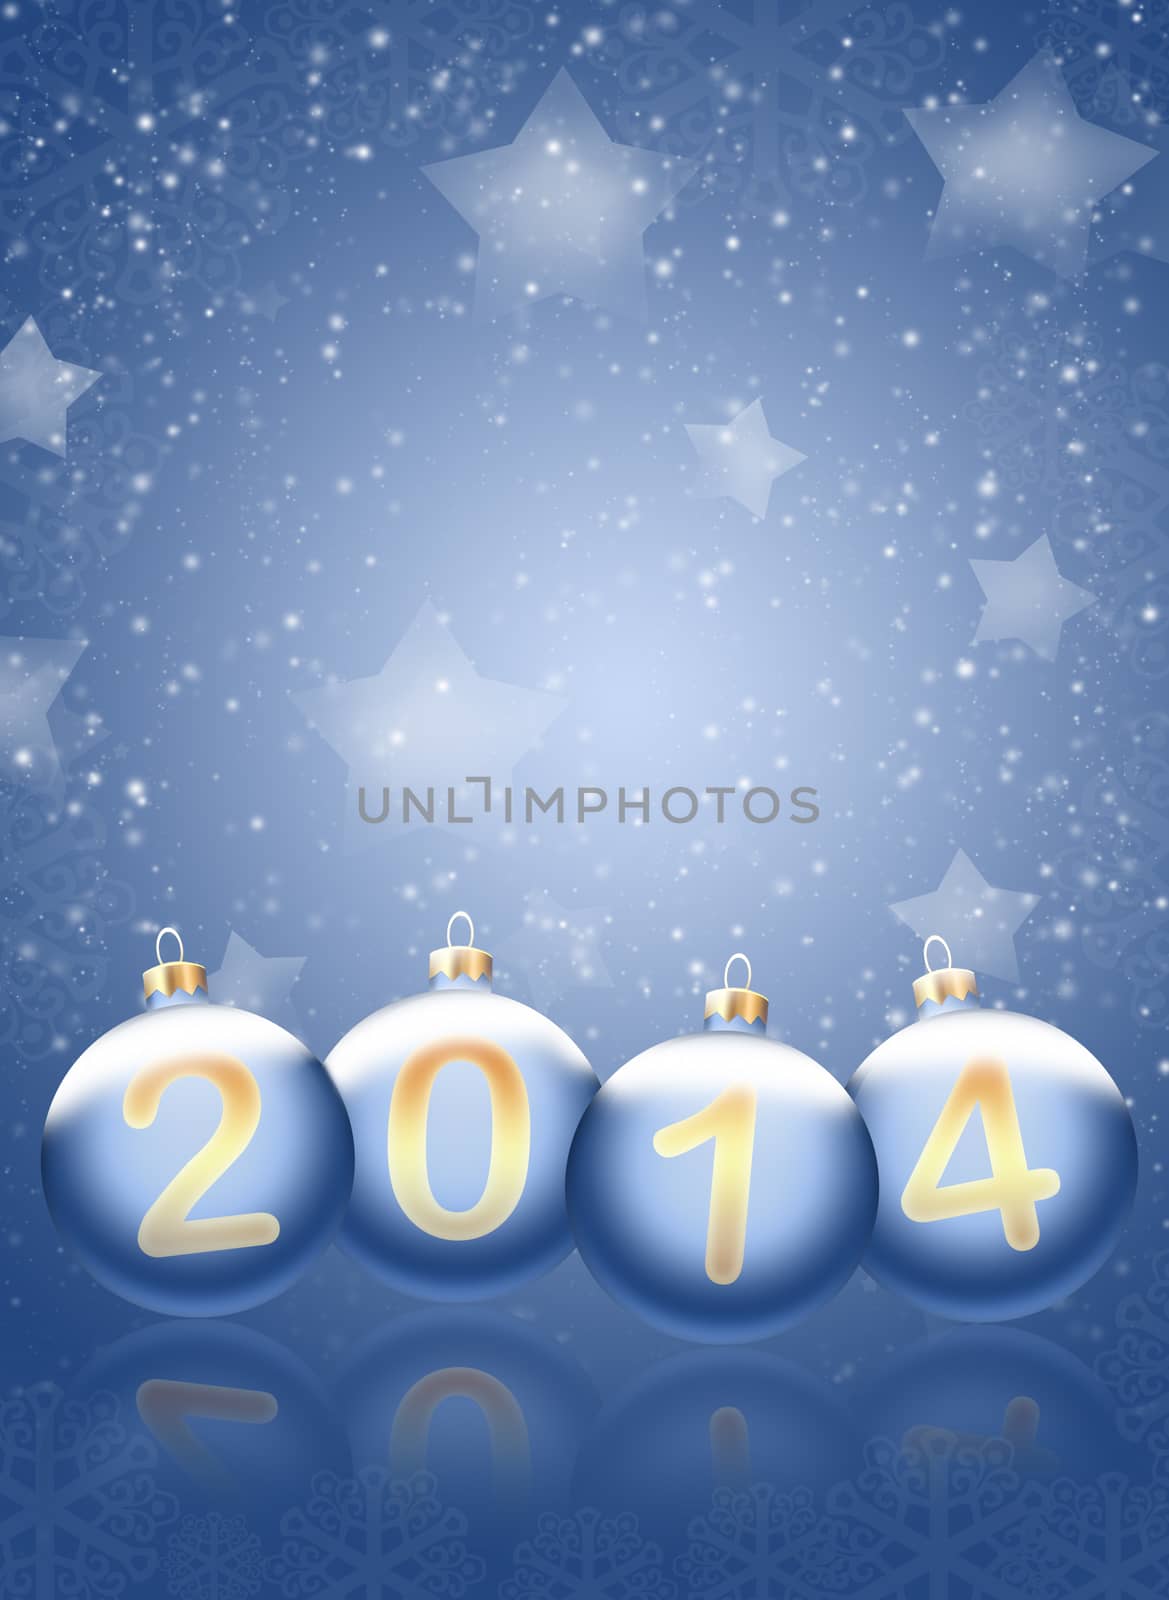 Christmas background. 2014 with reflections and snowflakes on a blue background